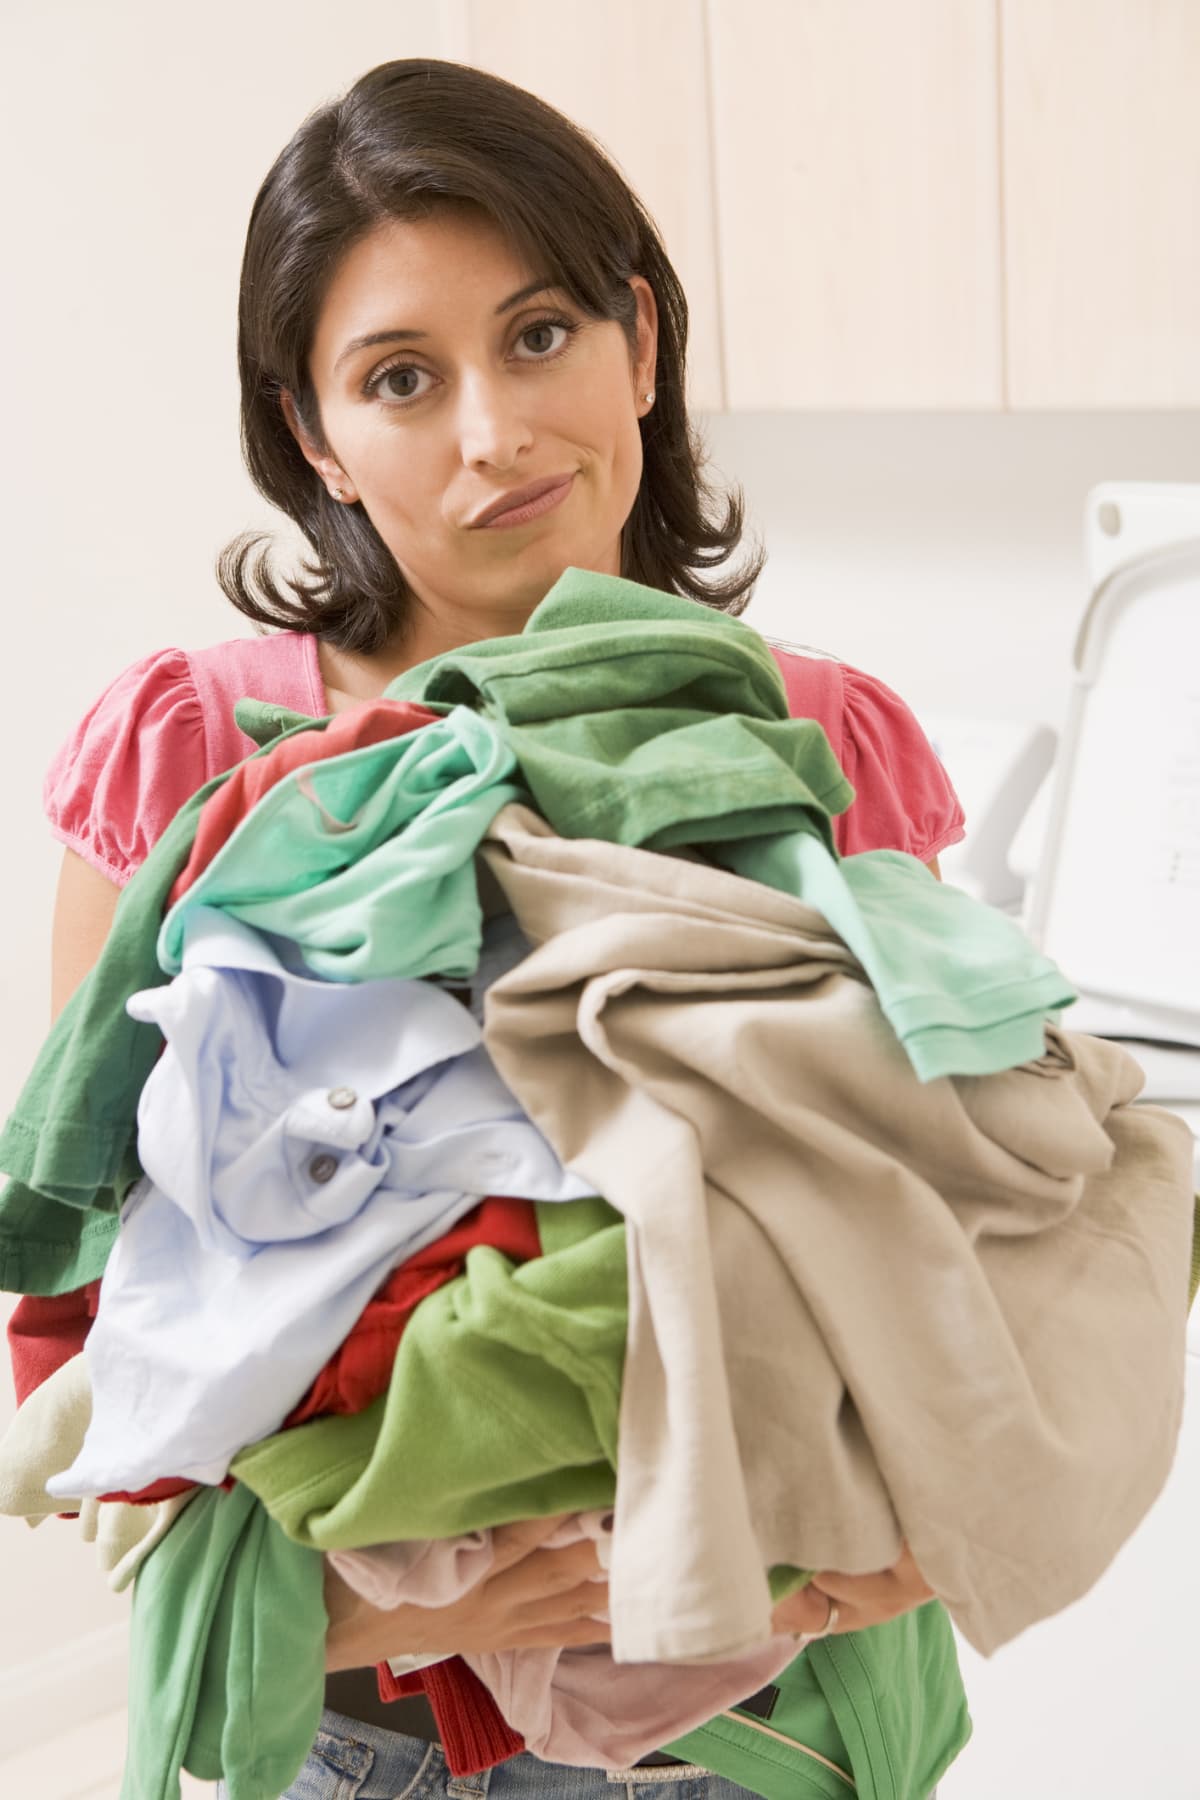 Woman holding a pile of laundry.